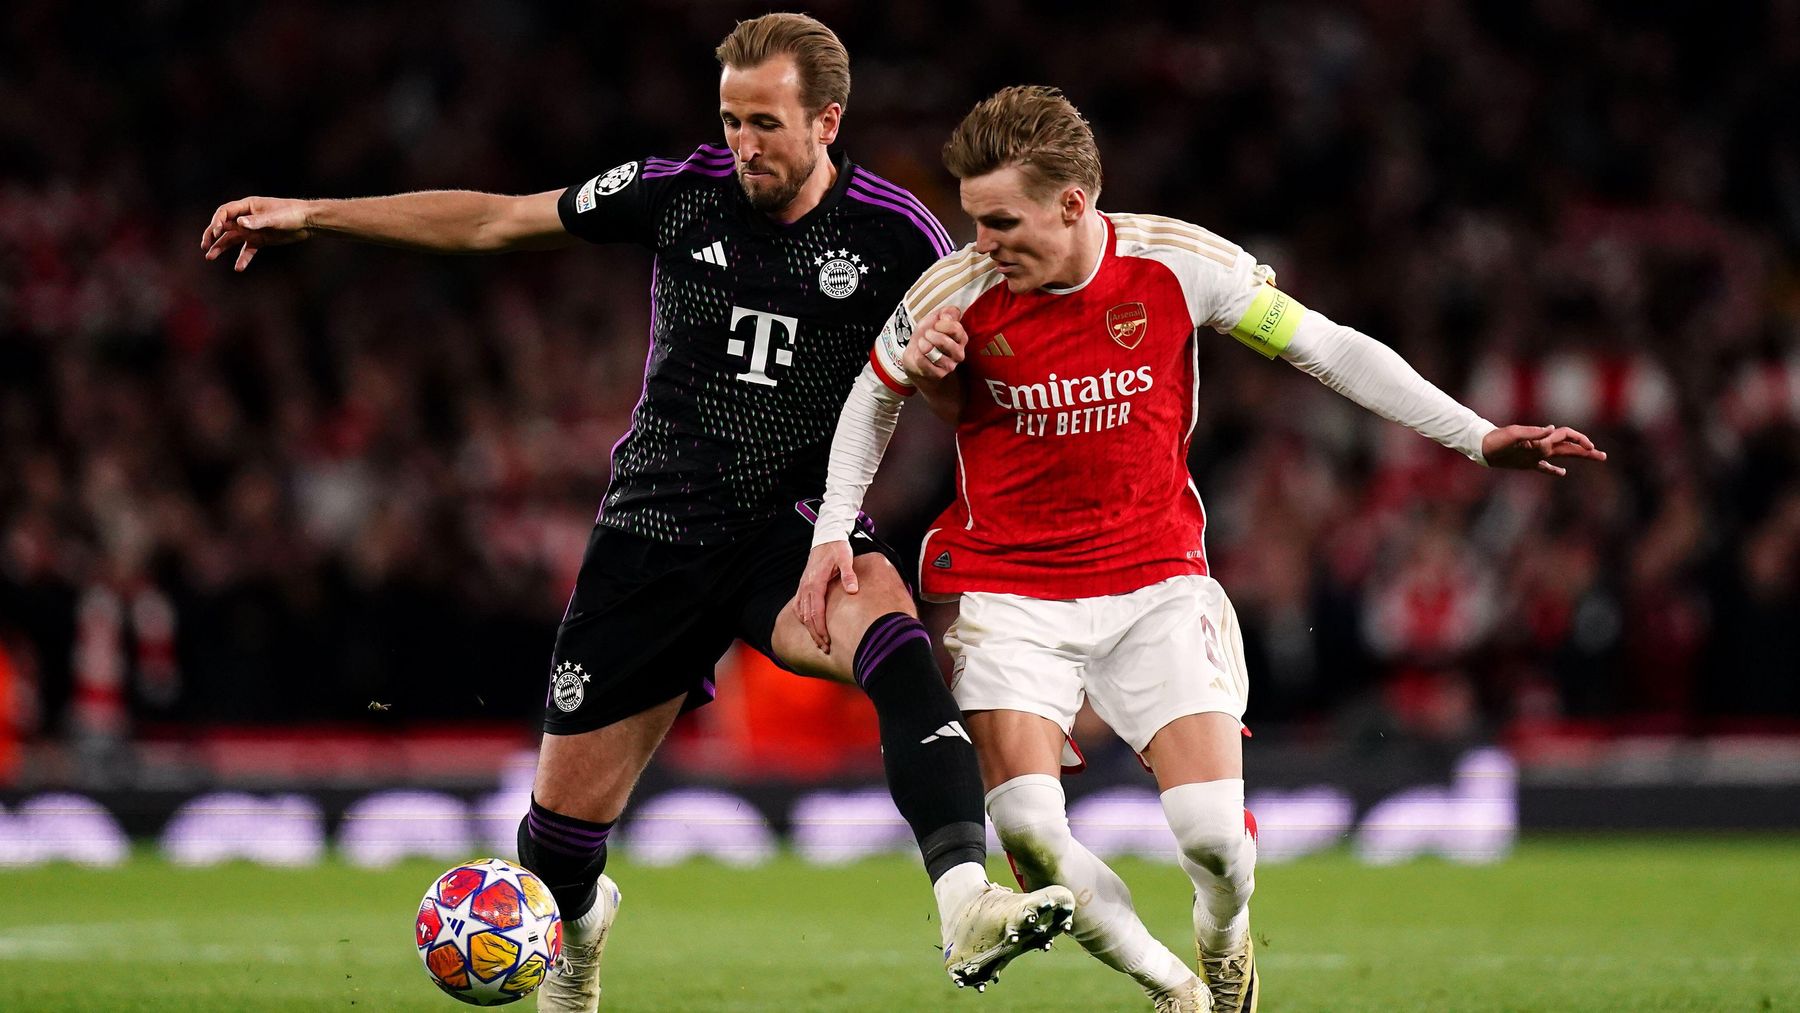 Bayern Munich vs Arsenal betting tips, BuildABet, best bets and preview